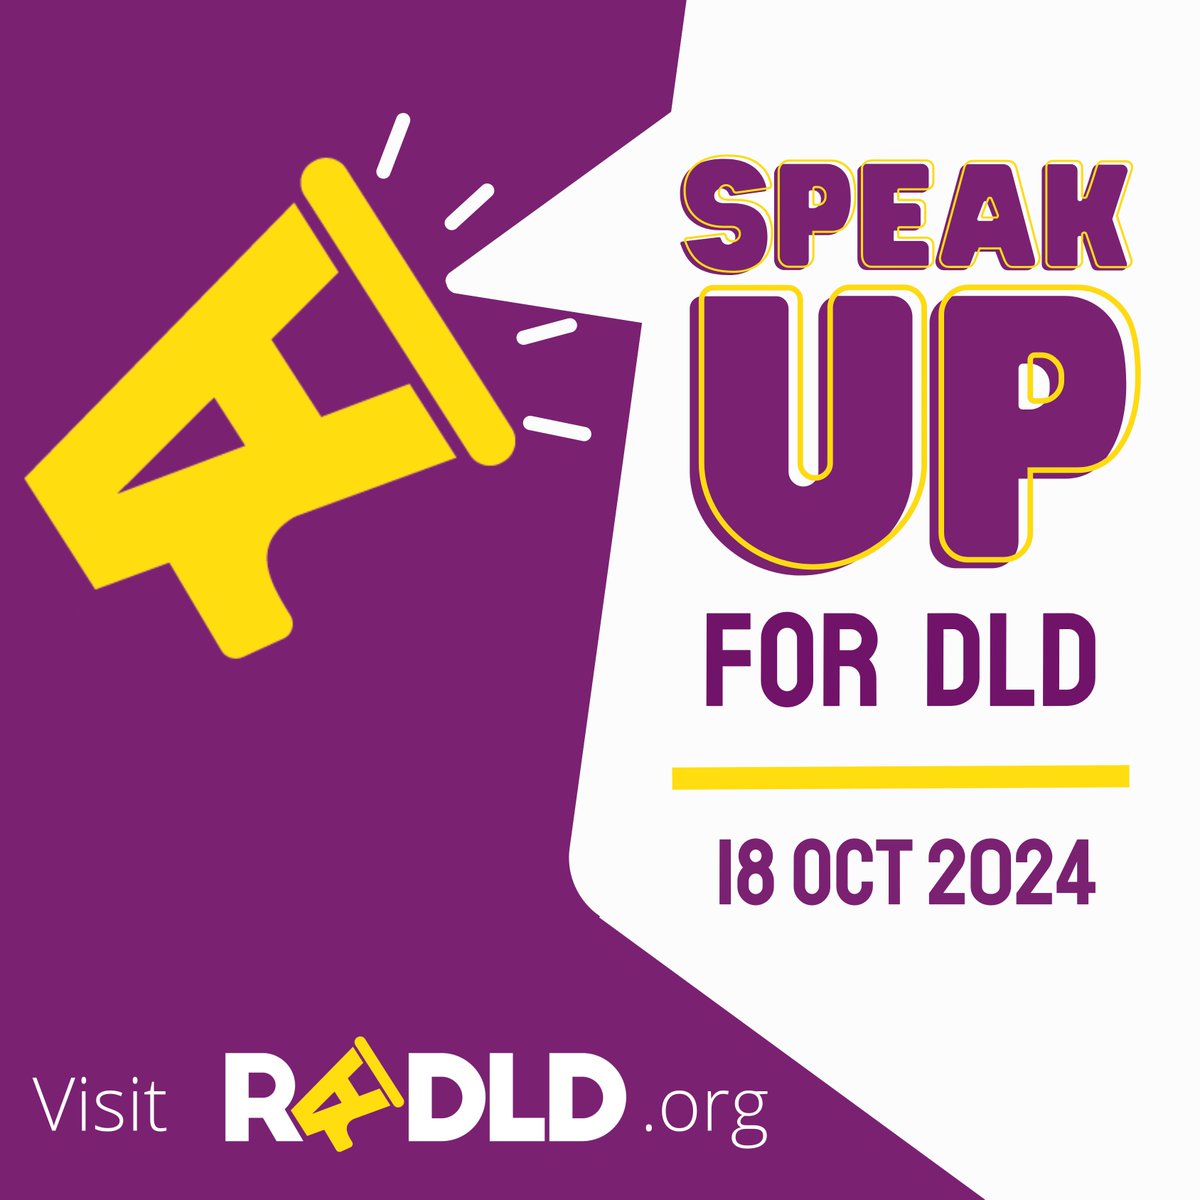 Breaking news! The theme for 2024 DLD day will be Speak Up for DLD! Let's put our heads together and think about how we can do that! It's not too early to make plan for this special day on Oct 14! @RADLDcam #DLDday #devlangdis